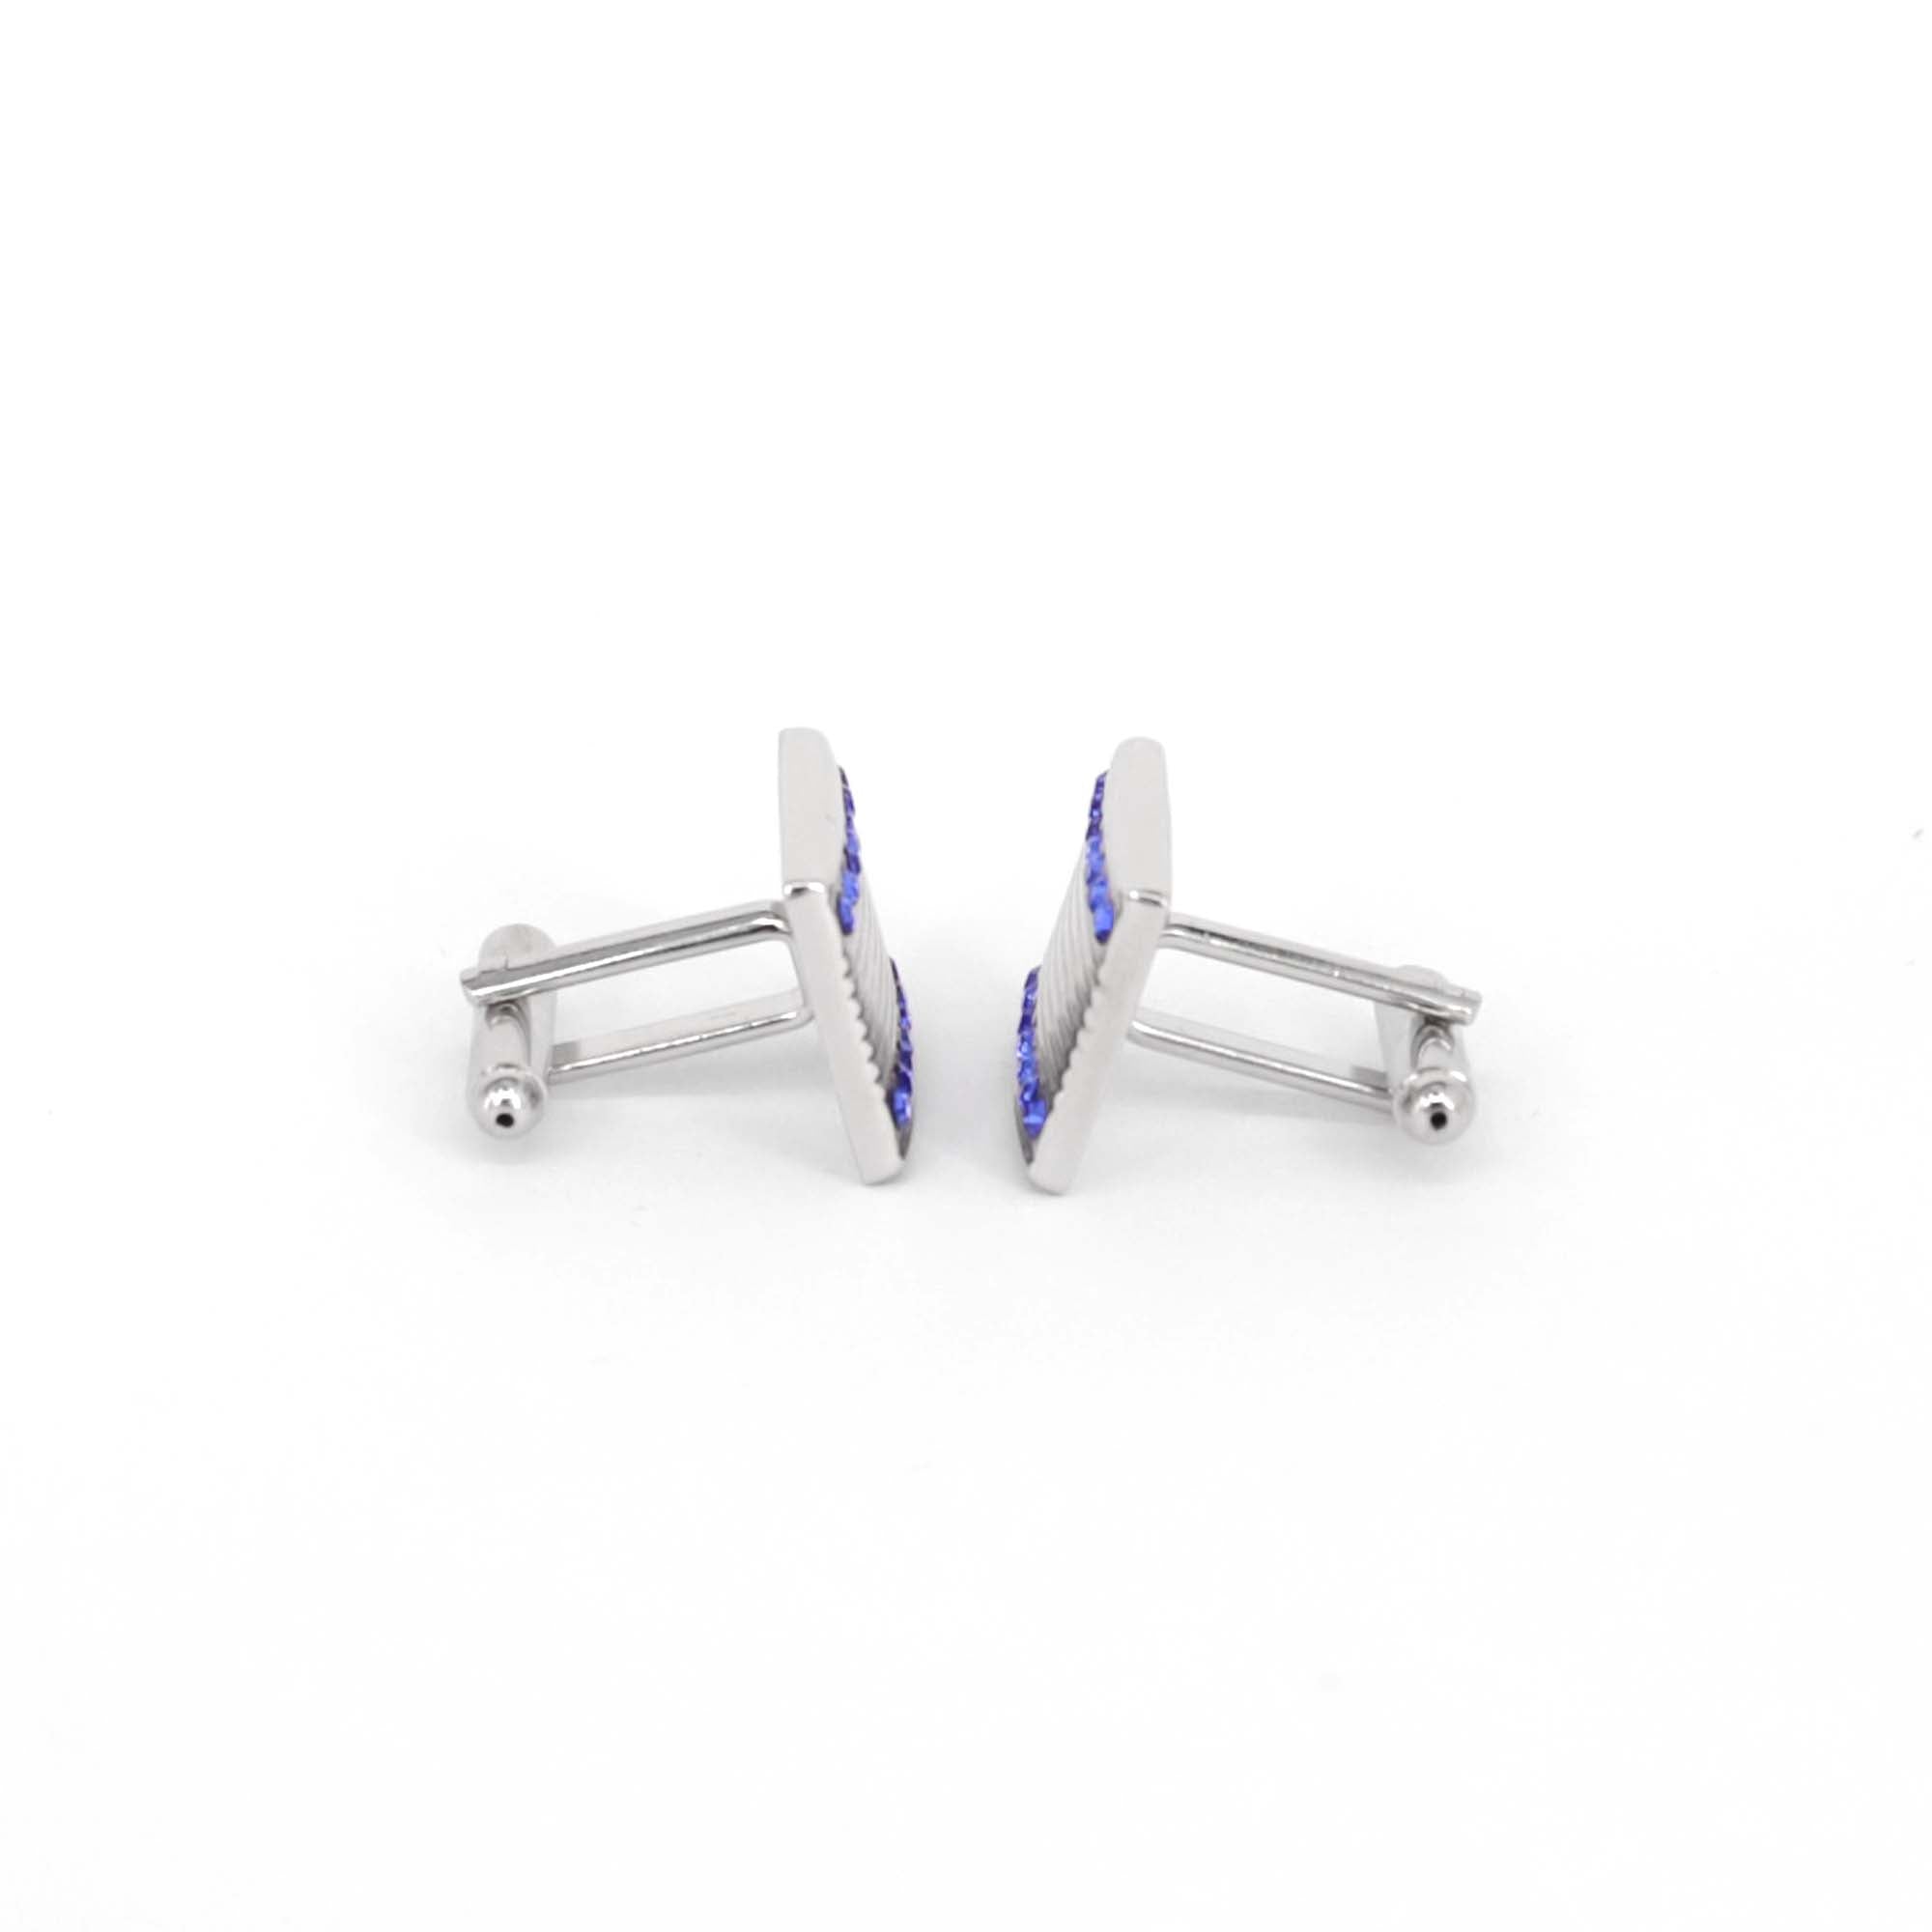 14 Blue Crystal Cufflinks rectangle (Online Exclusive)